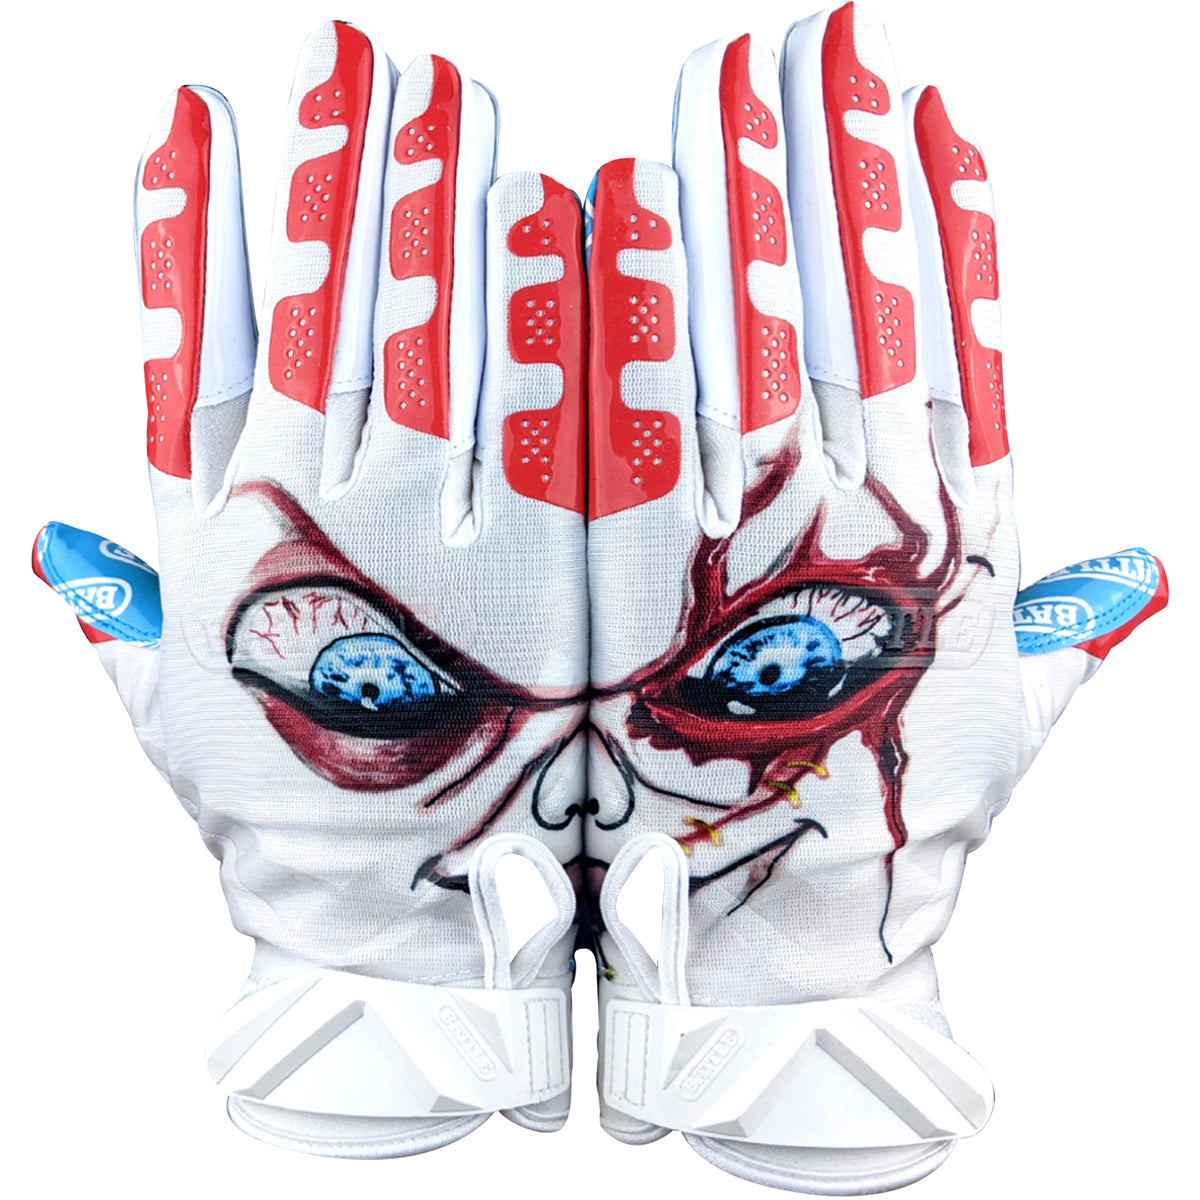 Battle Sports Adult Lil Evil Football Receiver Gloves - Red/White/Blue Battle Sports